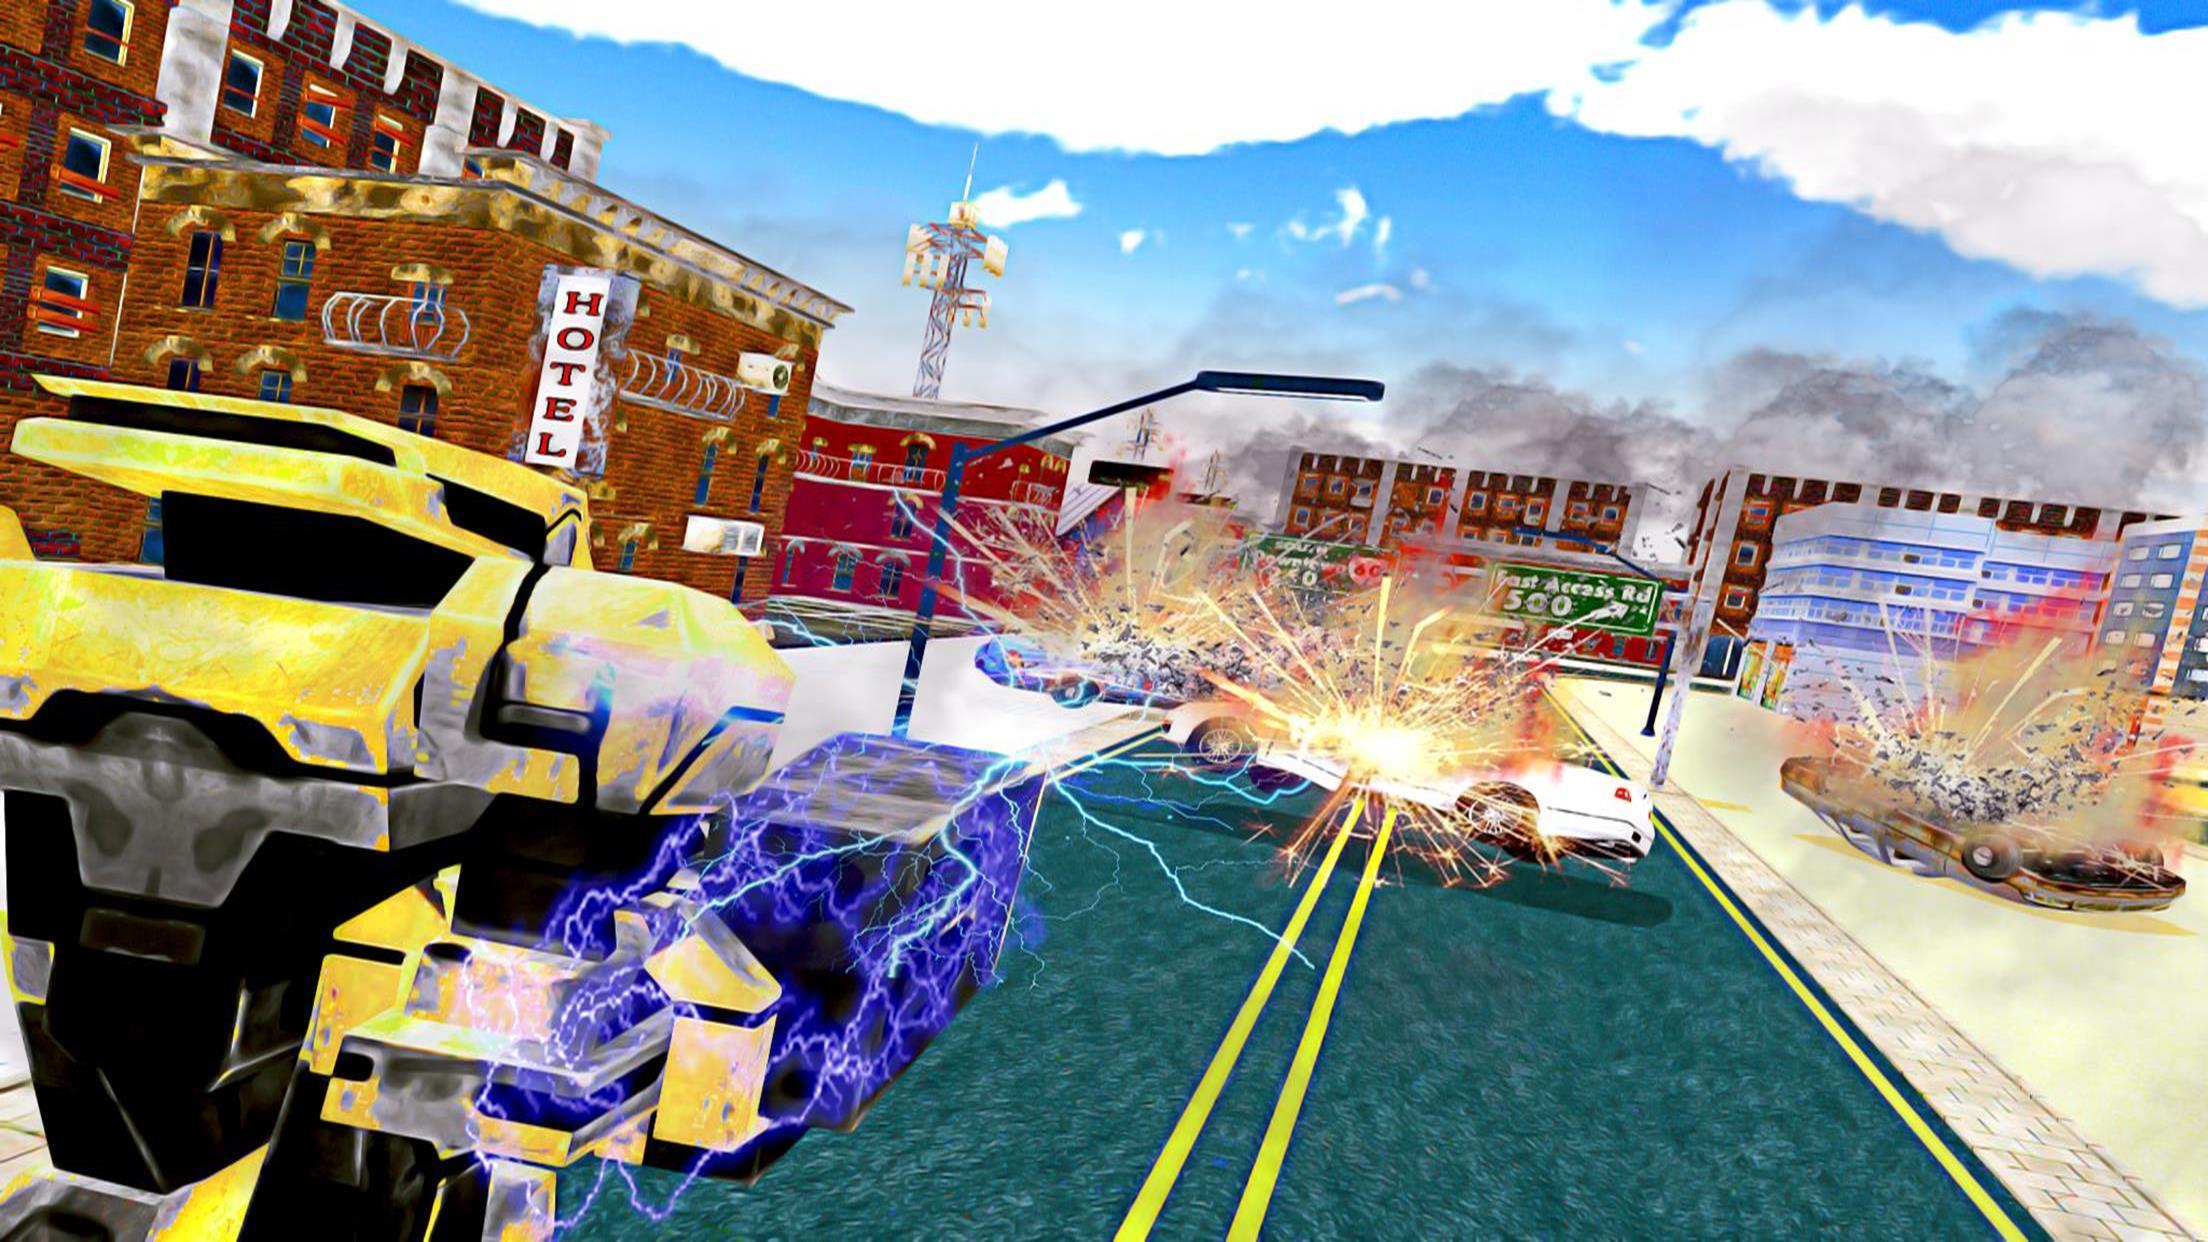 City Robot Battle War Hero for Android - APK Download